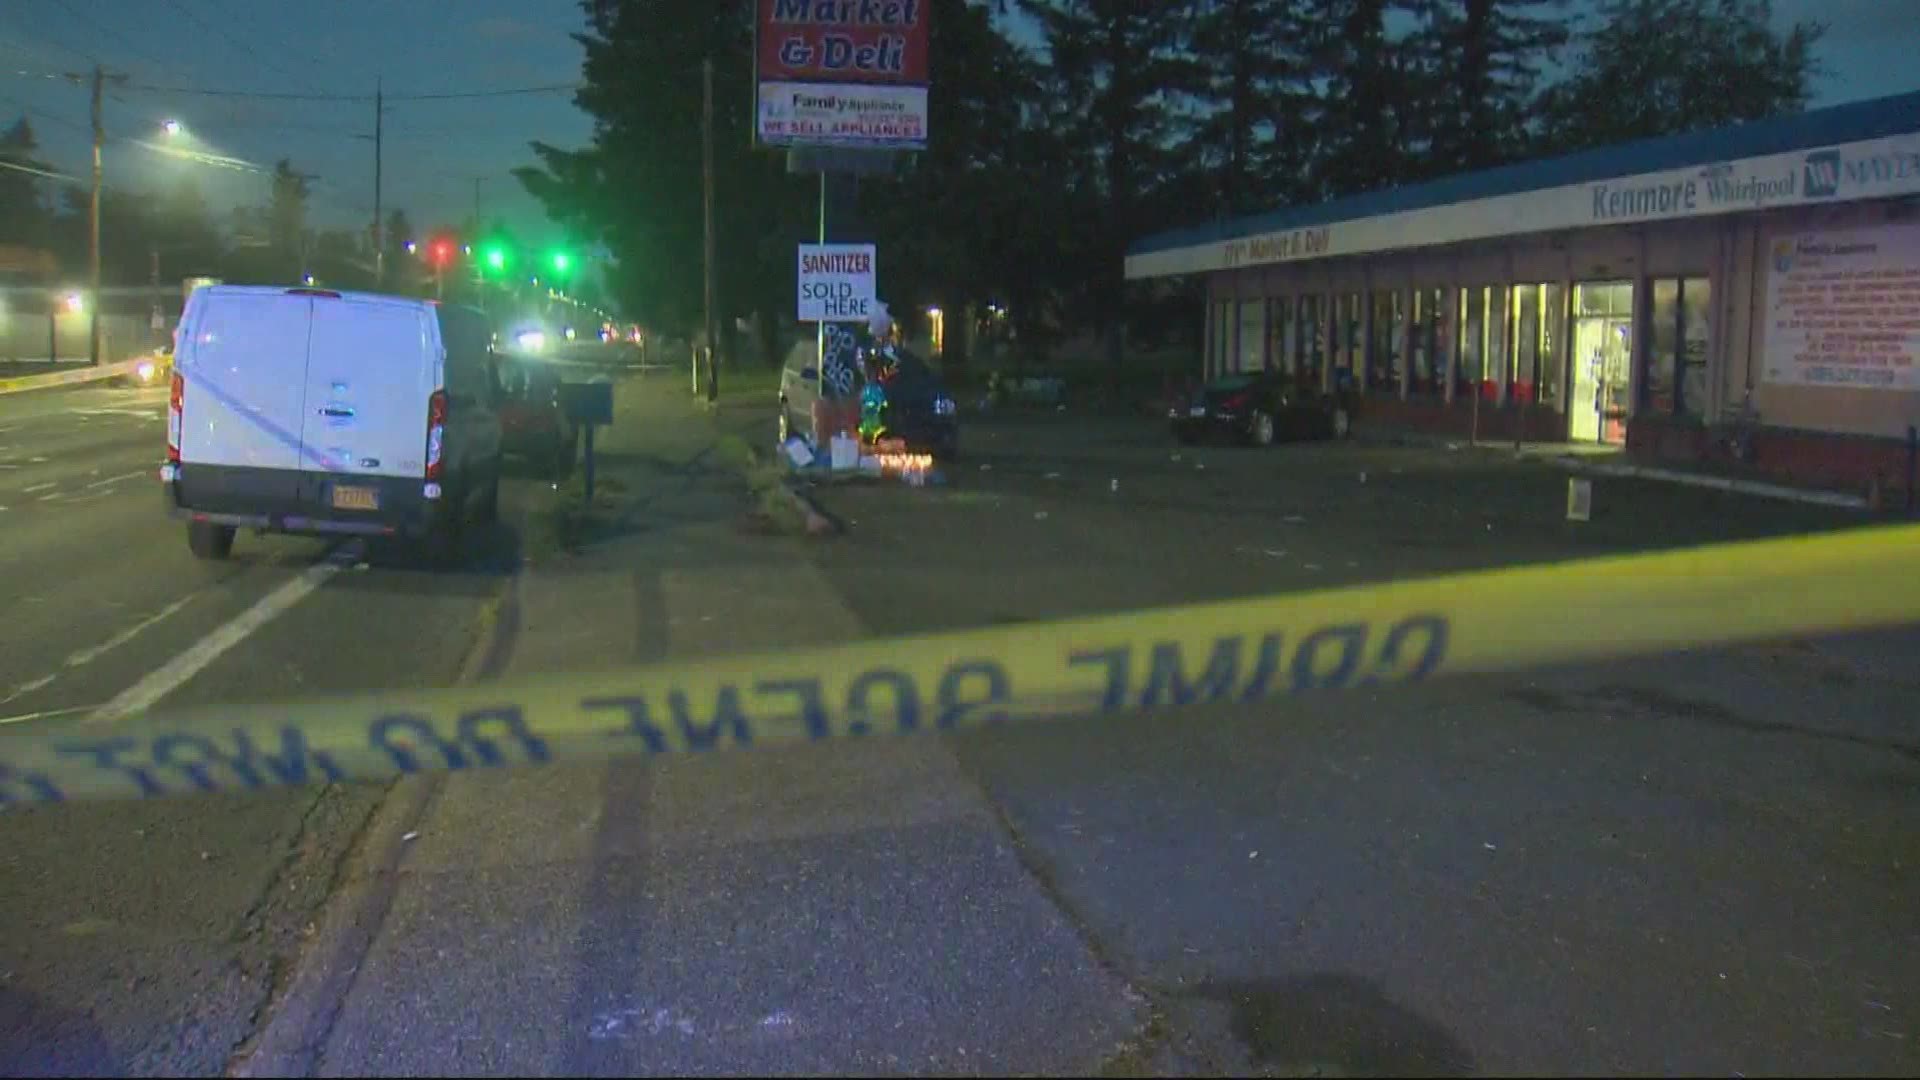 The shooting happened Monday night, at the same location where a 22-year-old man was shot and killed the night before.